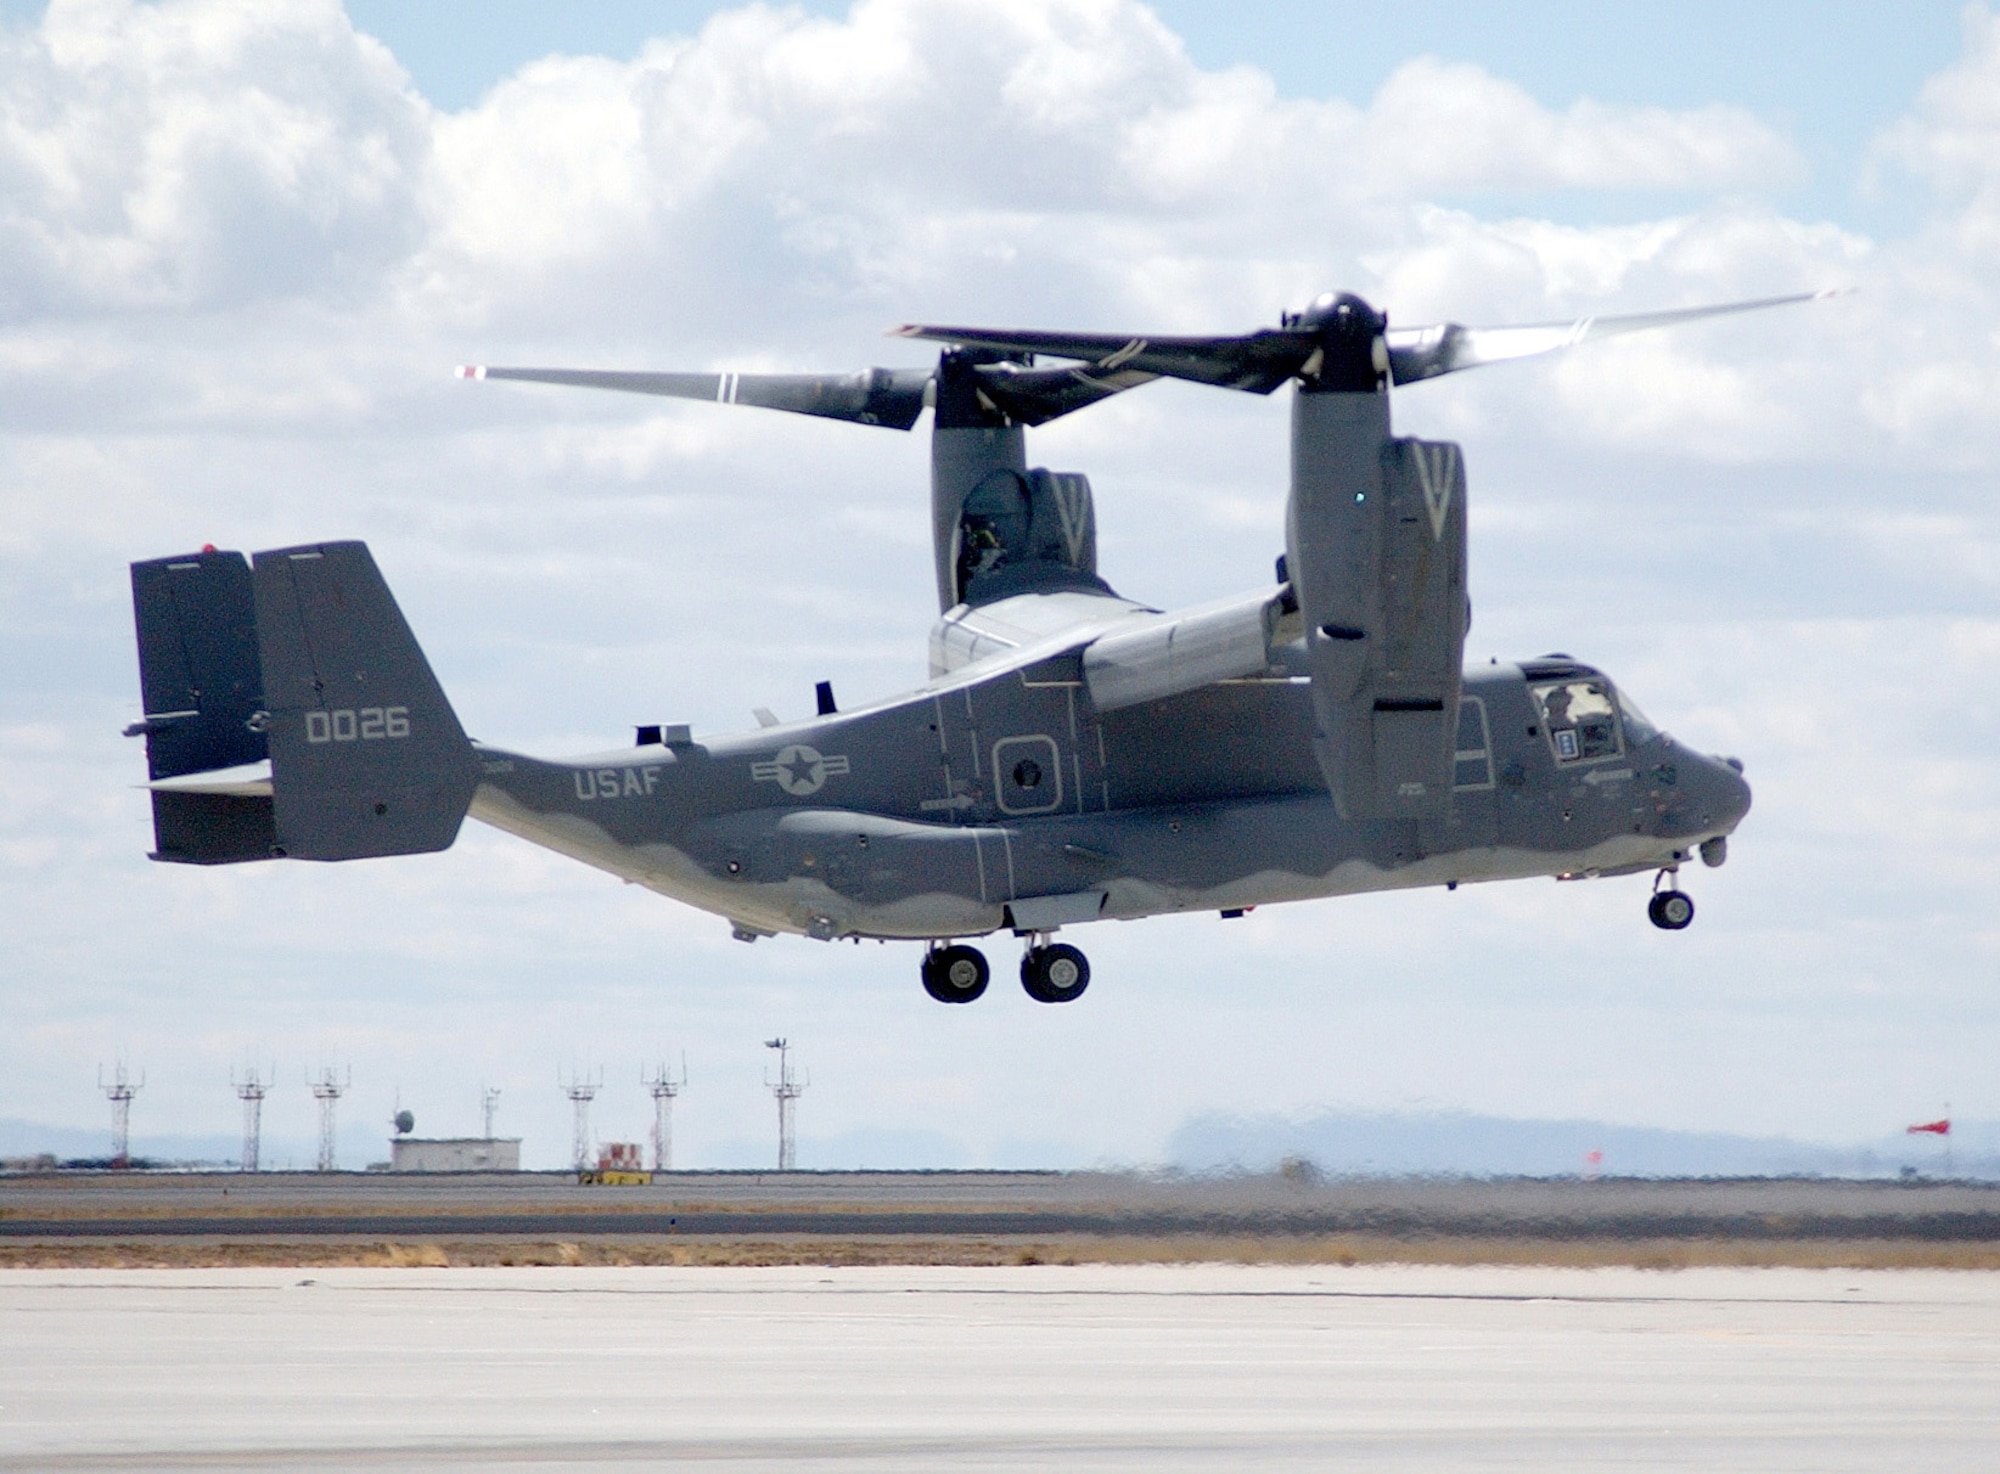 The Air Force's first operational CV-22 Osprey tilt-rotor aircraft hovers upon arrival at Kirtland Air Force Base, N.M., Monday, March 20, 2006.  The aircraft will be flown by Airmen with the 58th Special Operations Wing to train future Osprey pilots.  (U.S. Air Force photo/Staff Sgt. Markus Maier)